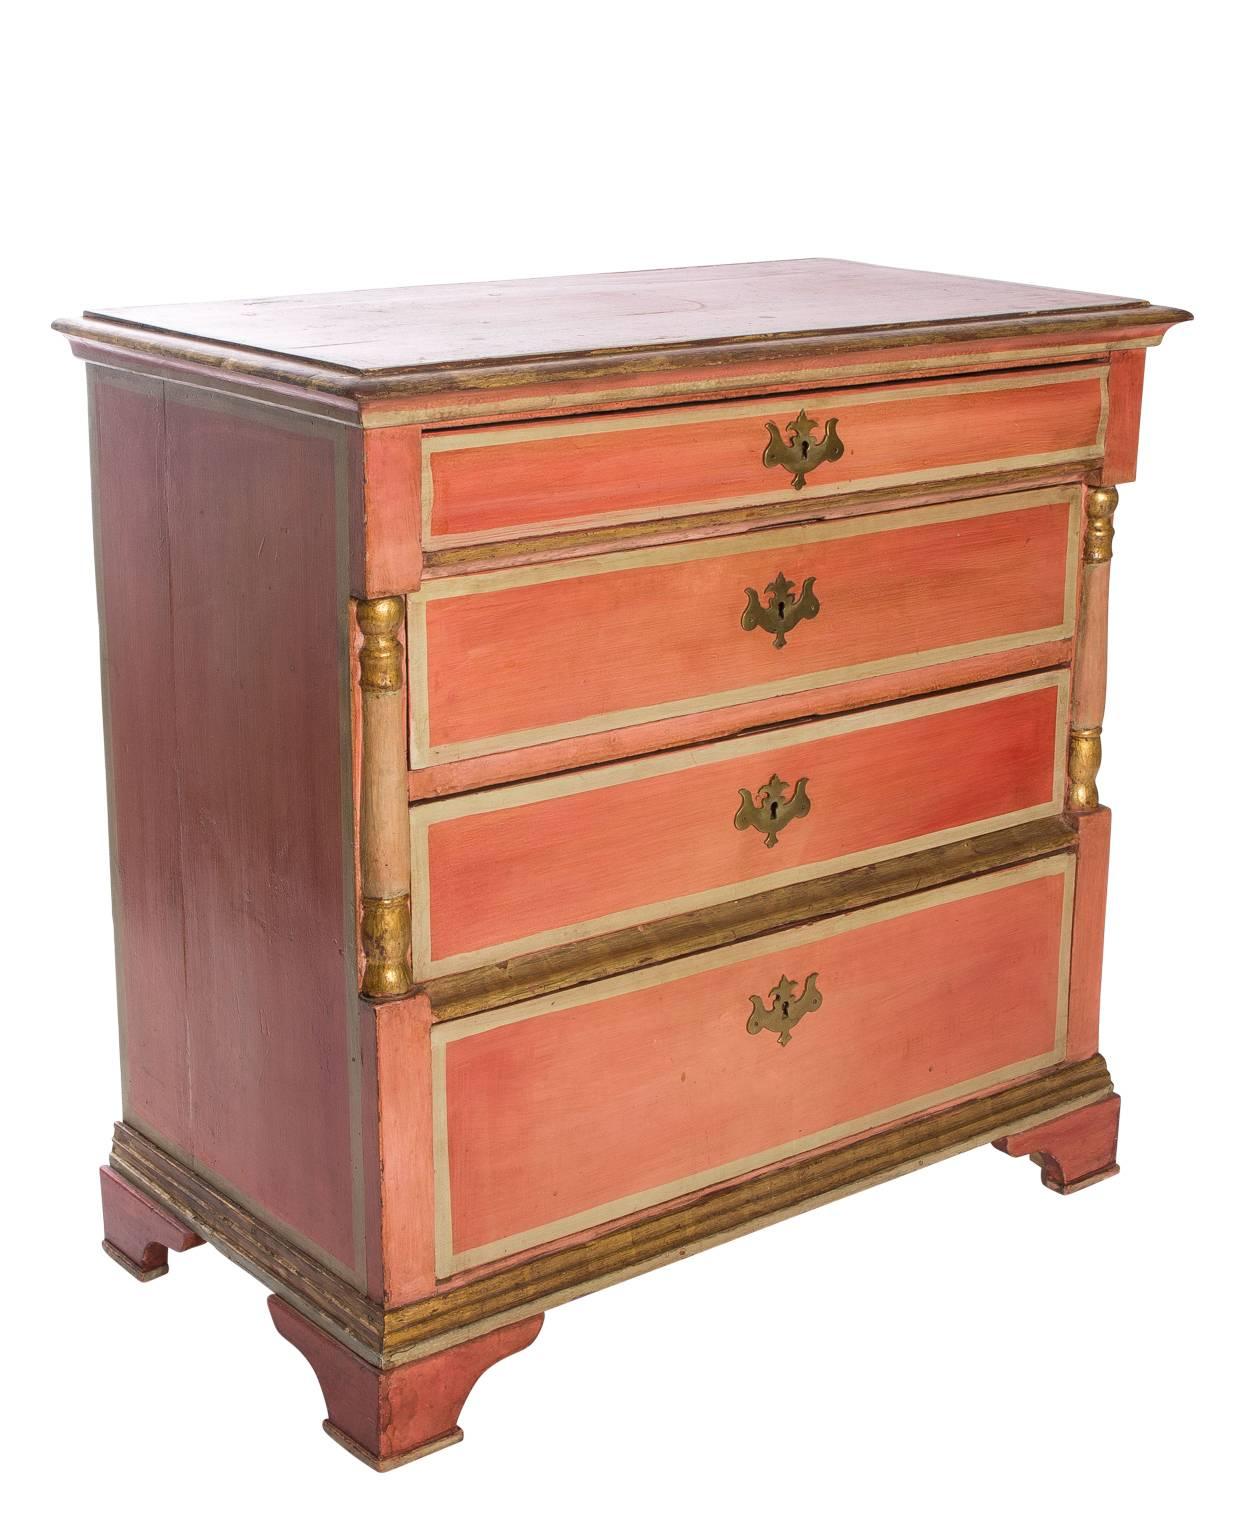 19th century Danish dresser in its original orange finish with gilded detailing. Dresser consists of four drawers with brass fittings.